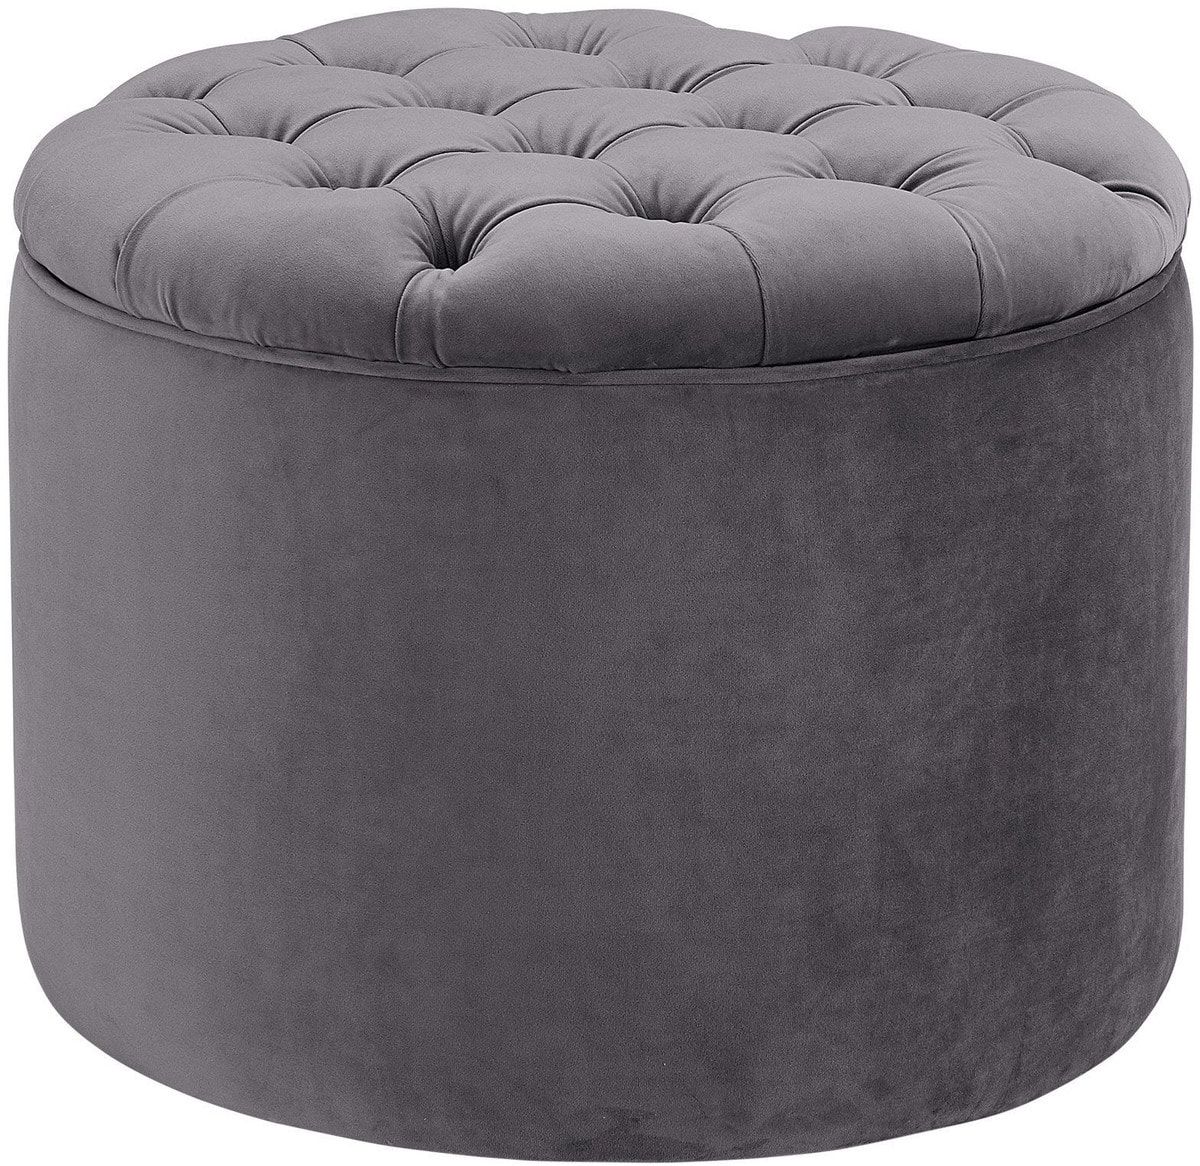 Gray Velvet Ribbed Fabric Round Storage Ottomans Pertaining To Fashionable Queen Grey Velvet Storage Ottoman (View 5 of 10)